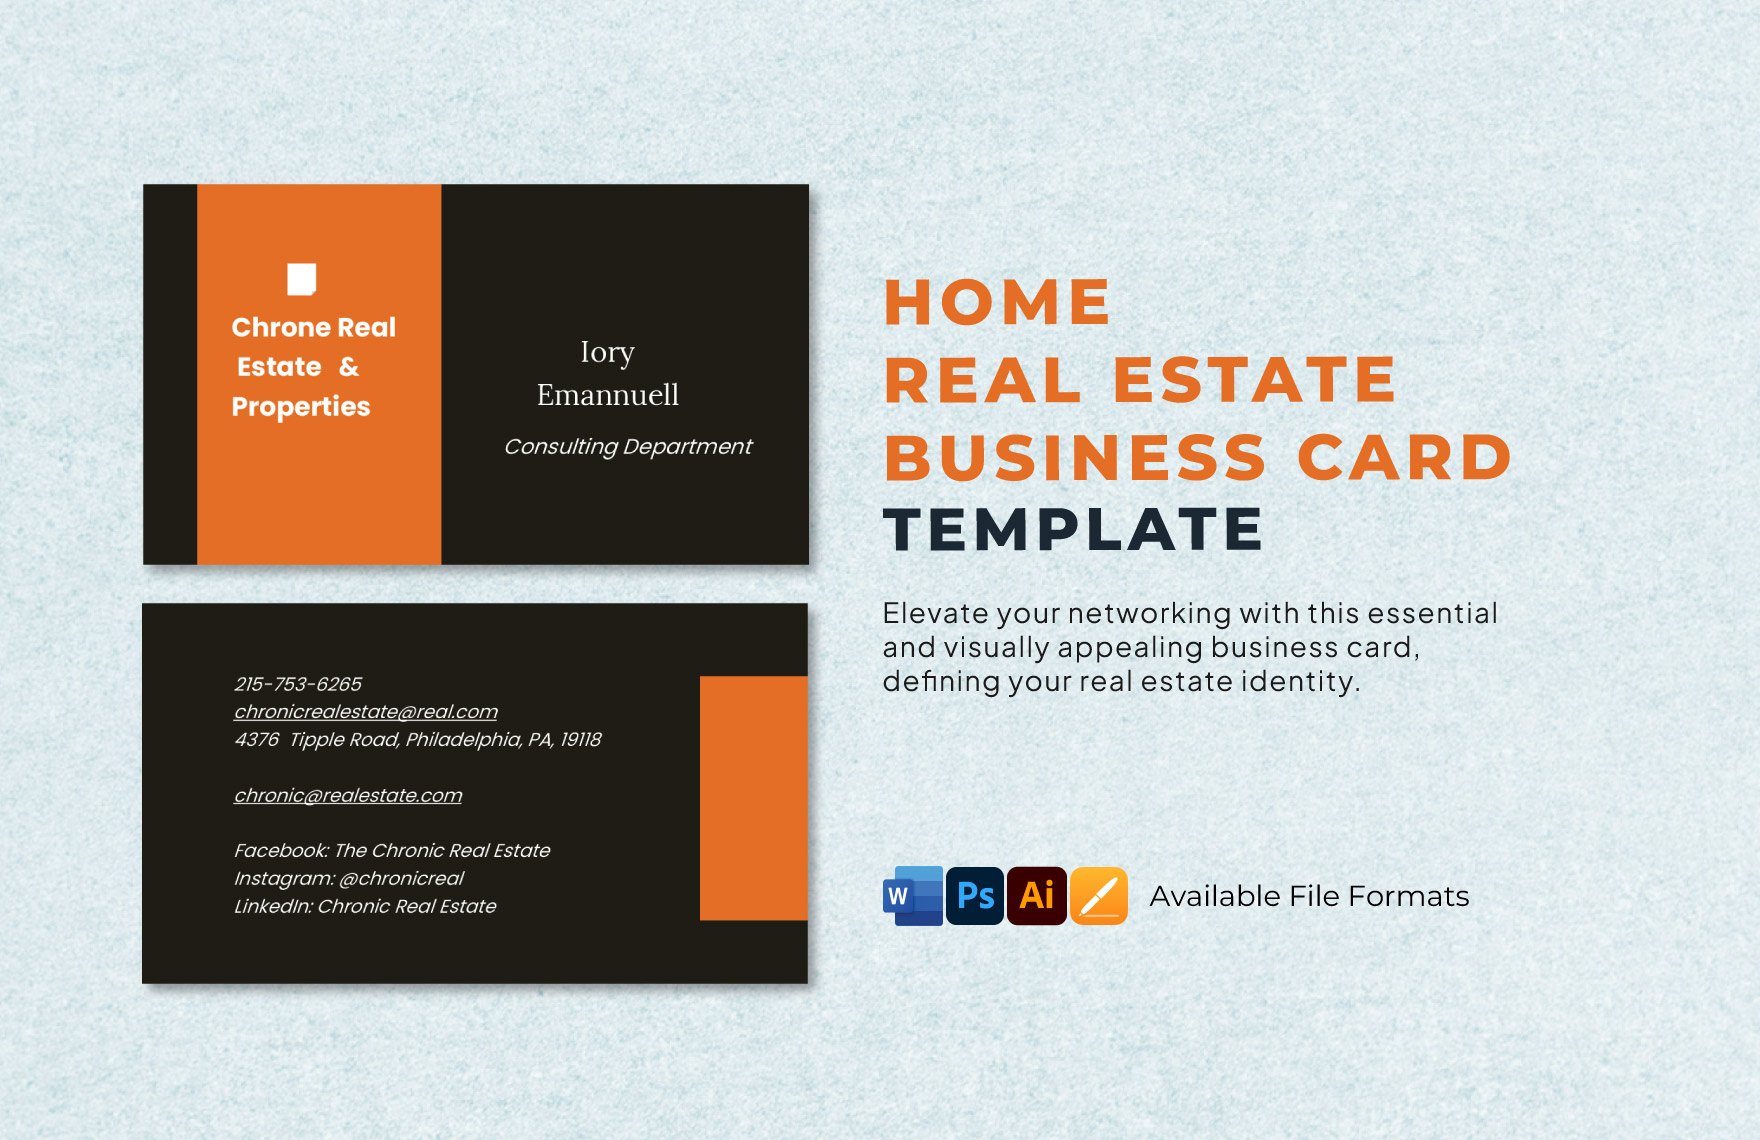 Home Real Estate Business Card Template